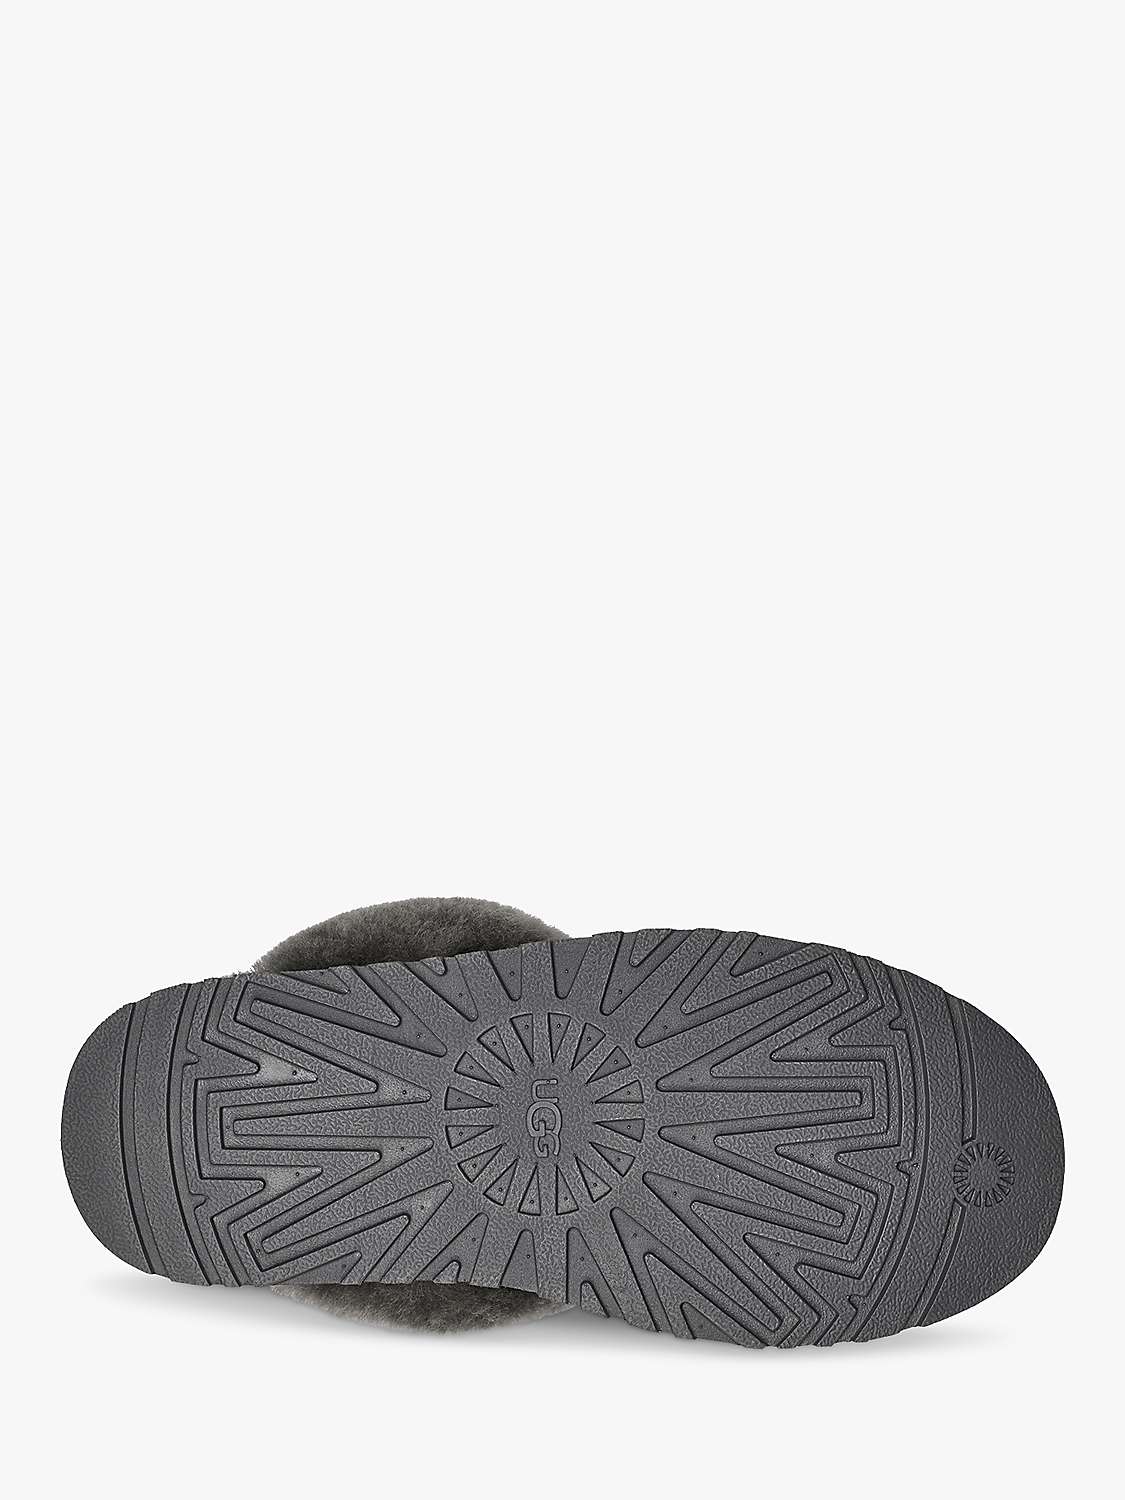 Buy UGG Disquette Suede Slippers Online at johnlewis.com